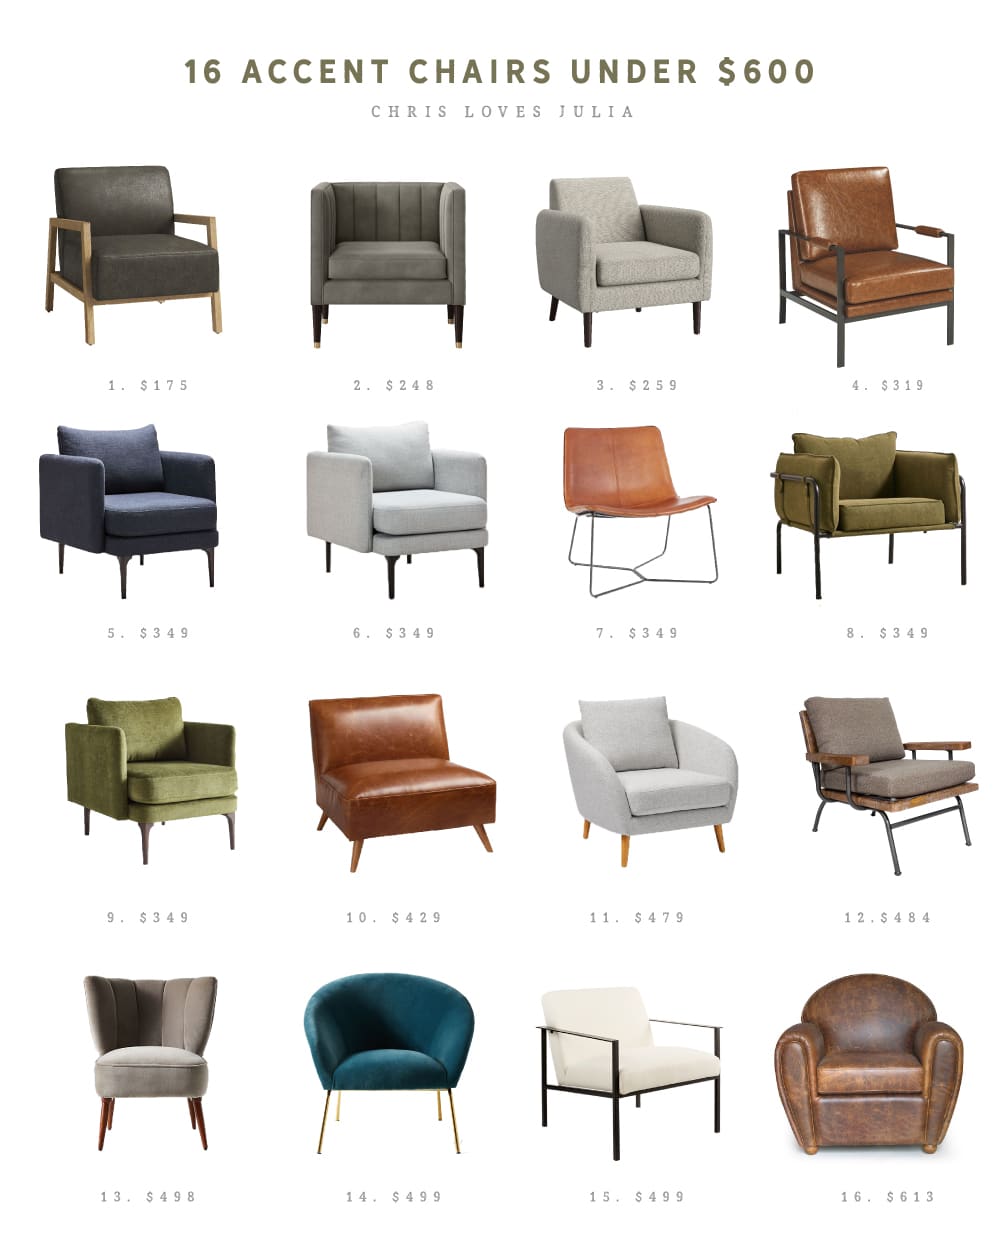 14 Popular Living Room Layouts Accent Chairs Under 600 Chris Loves Julia